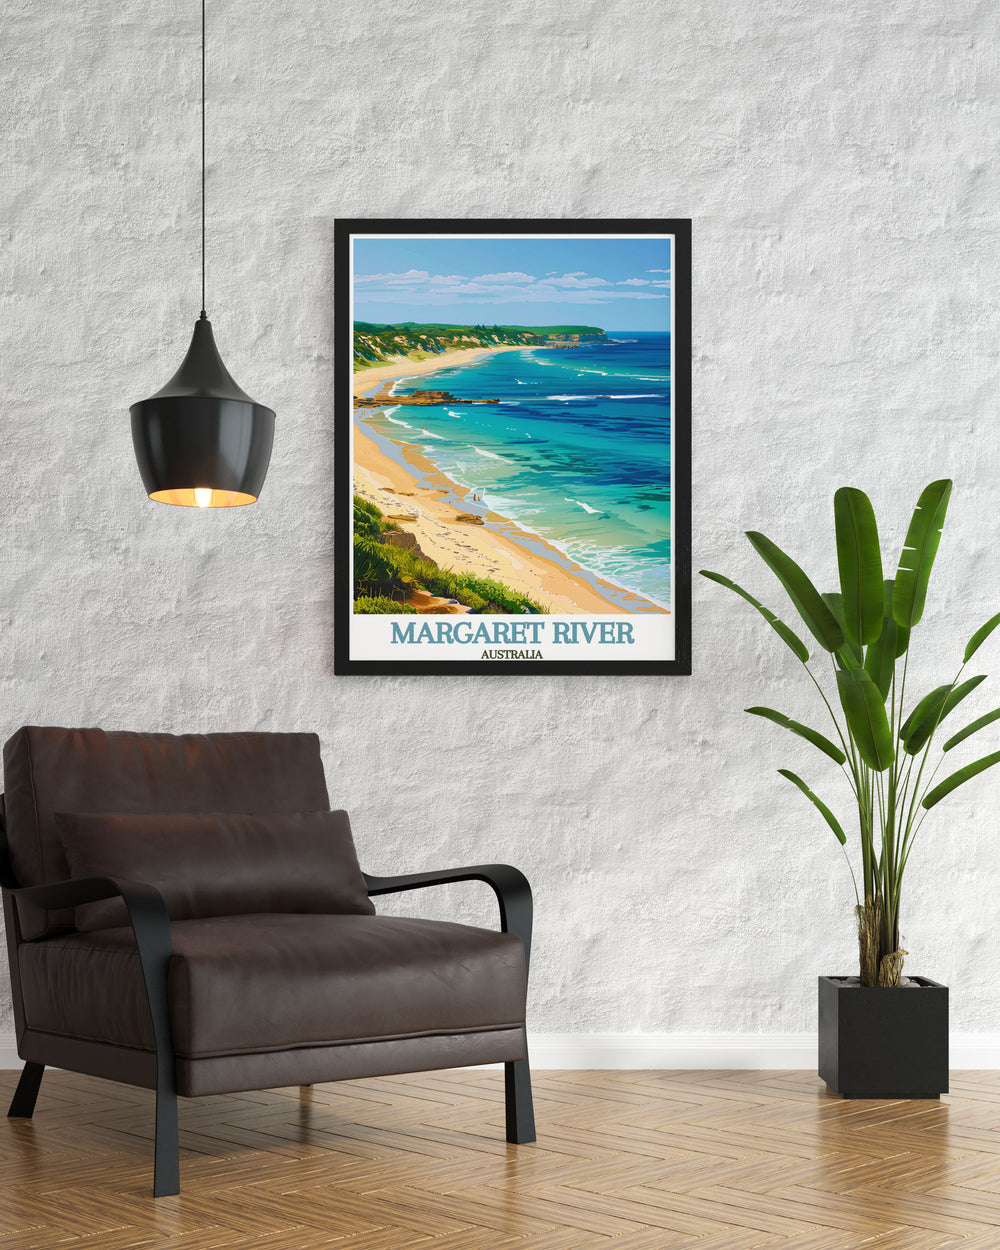 Transform your living space with Australia Travel Art showcasing the serene beauty of Margaret River and Prevelly Beach ideal for nature lovers and art enthusiasts